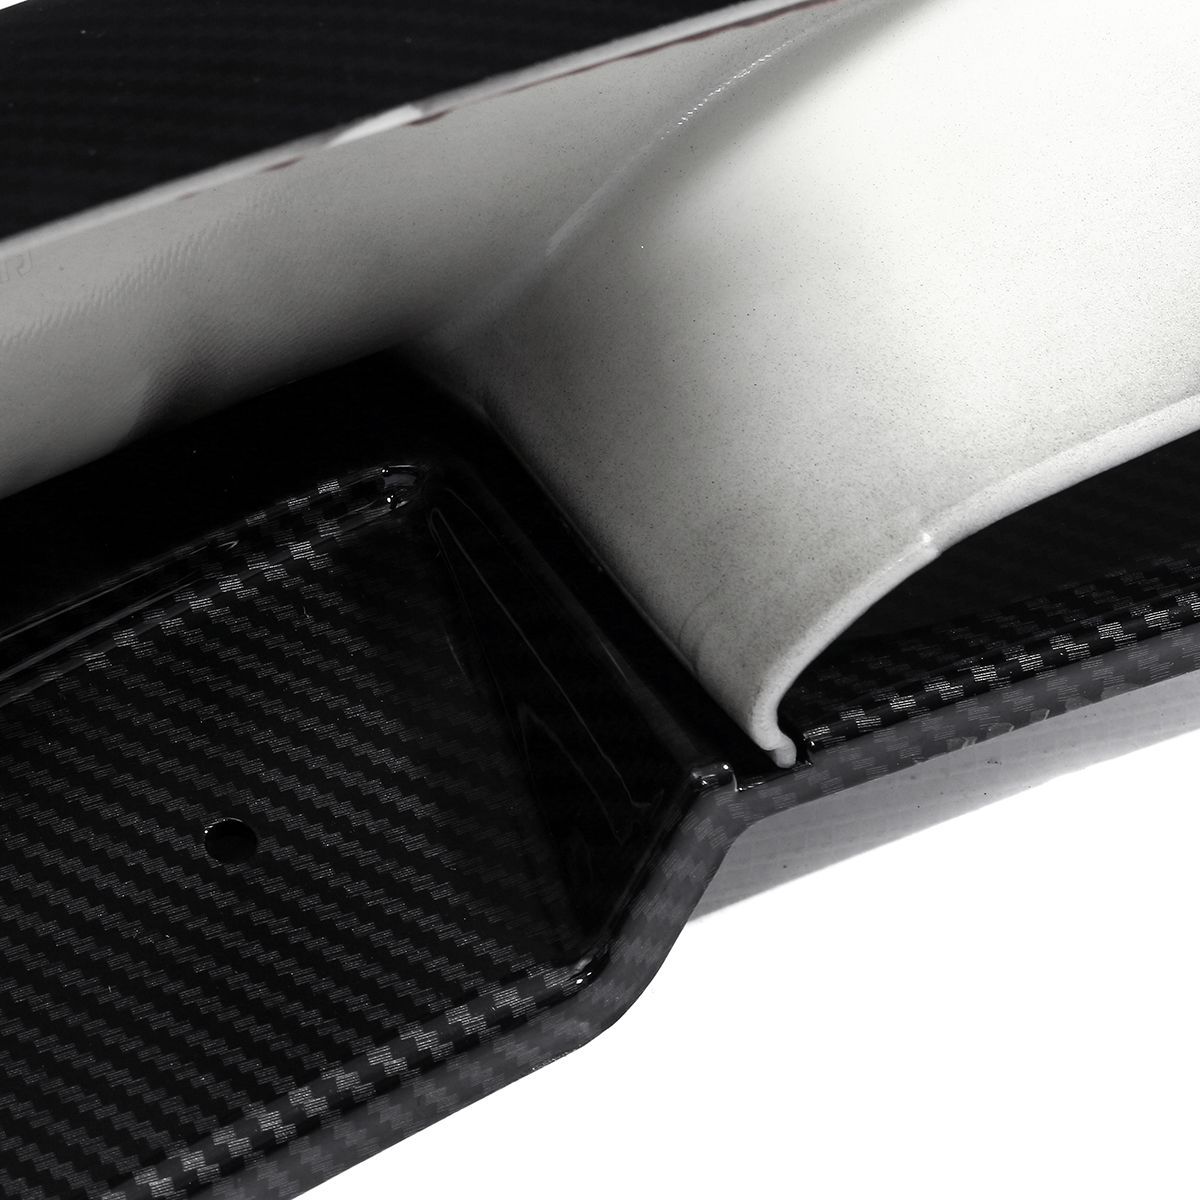 Carbon-Fiber-Front-Bumper-Protector-Cover-Splitter-Lip-For-BMW-F30-3-Series-M-Style-2012-18-1578470